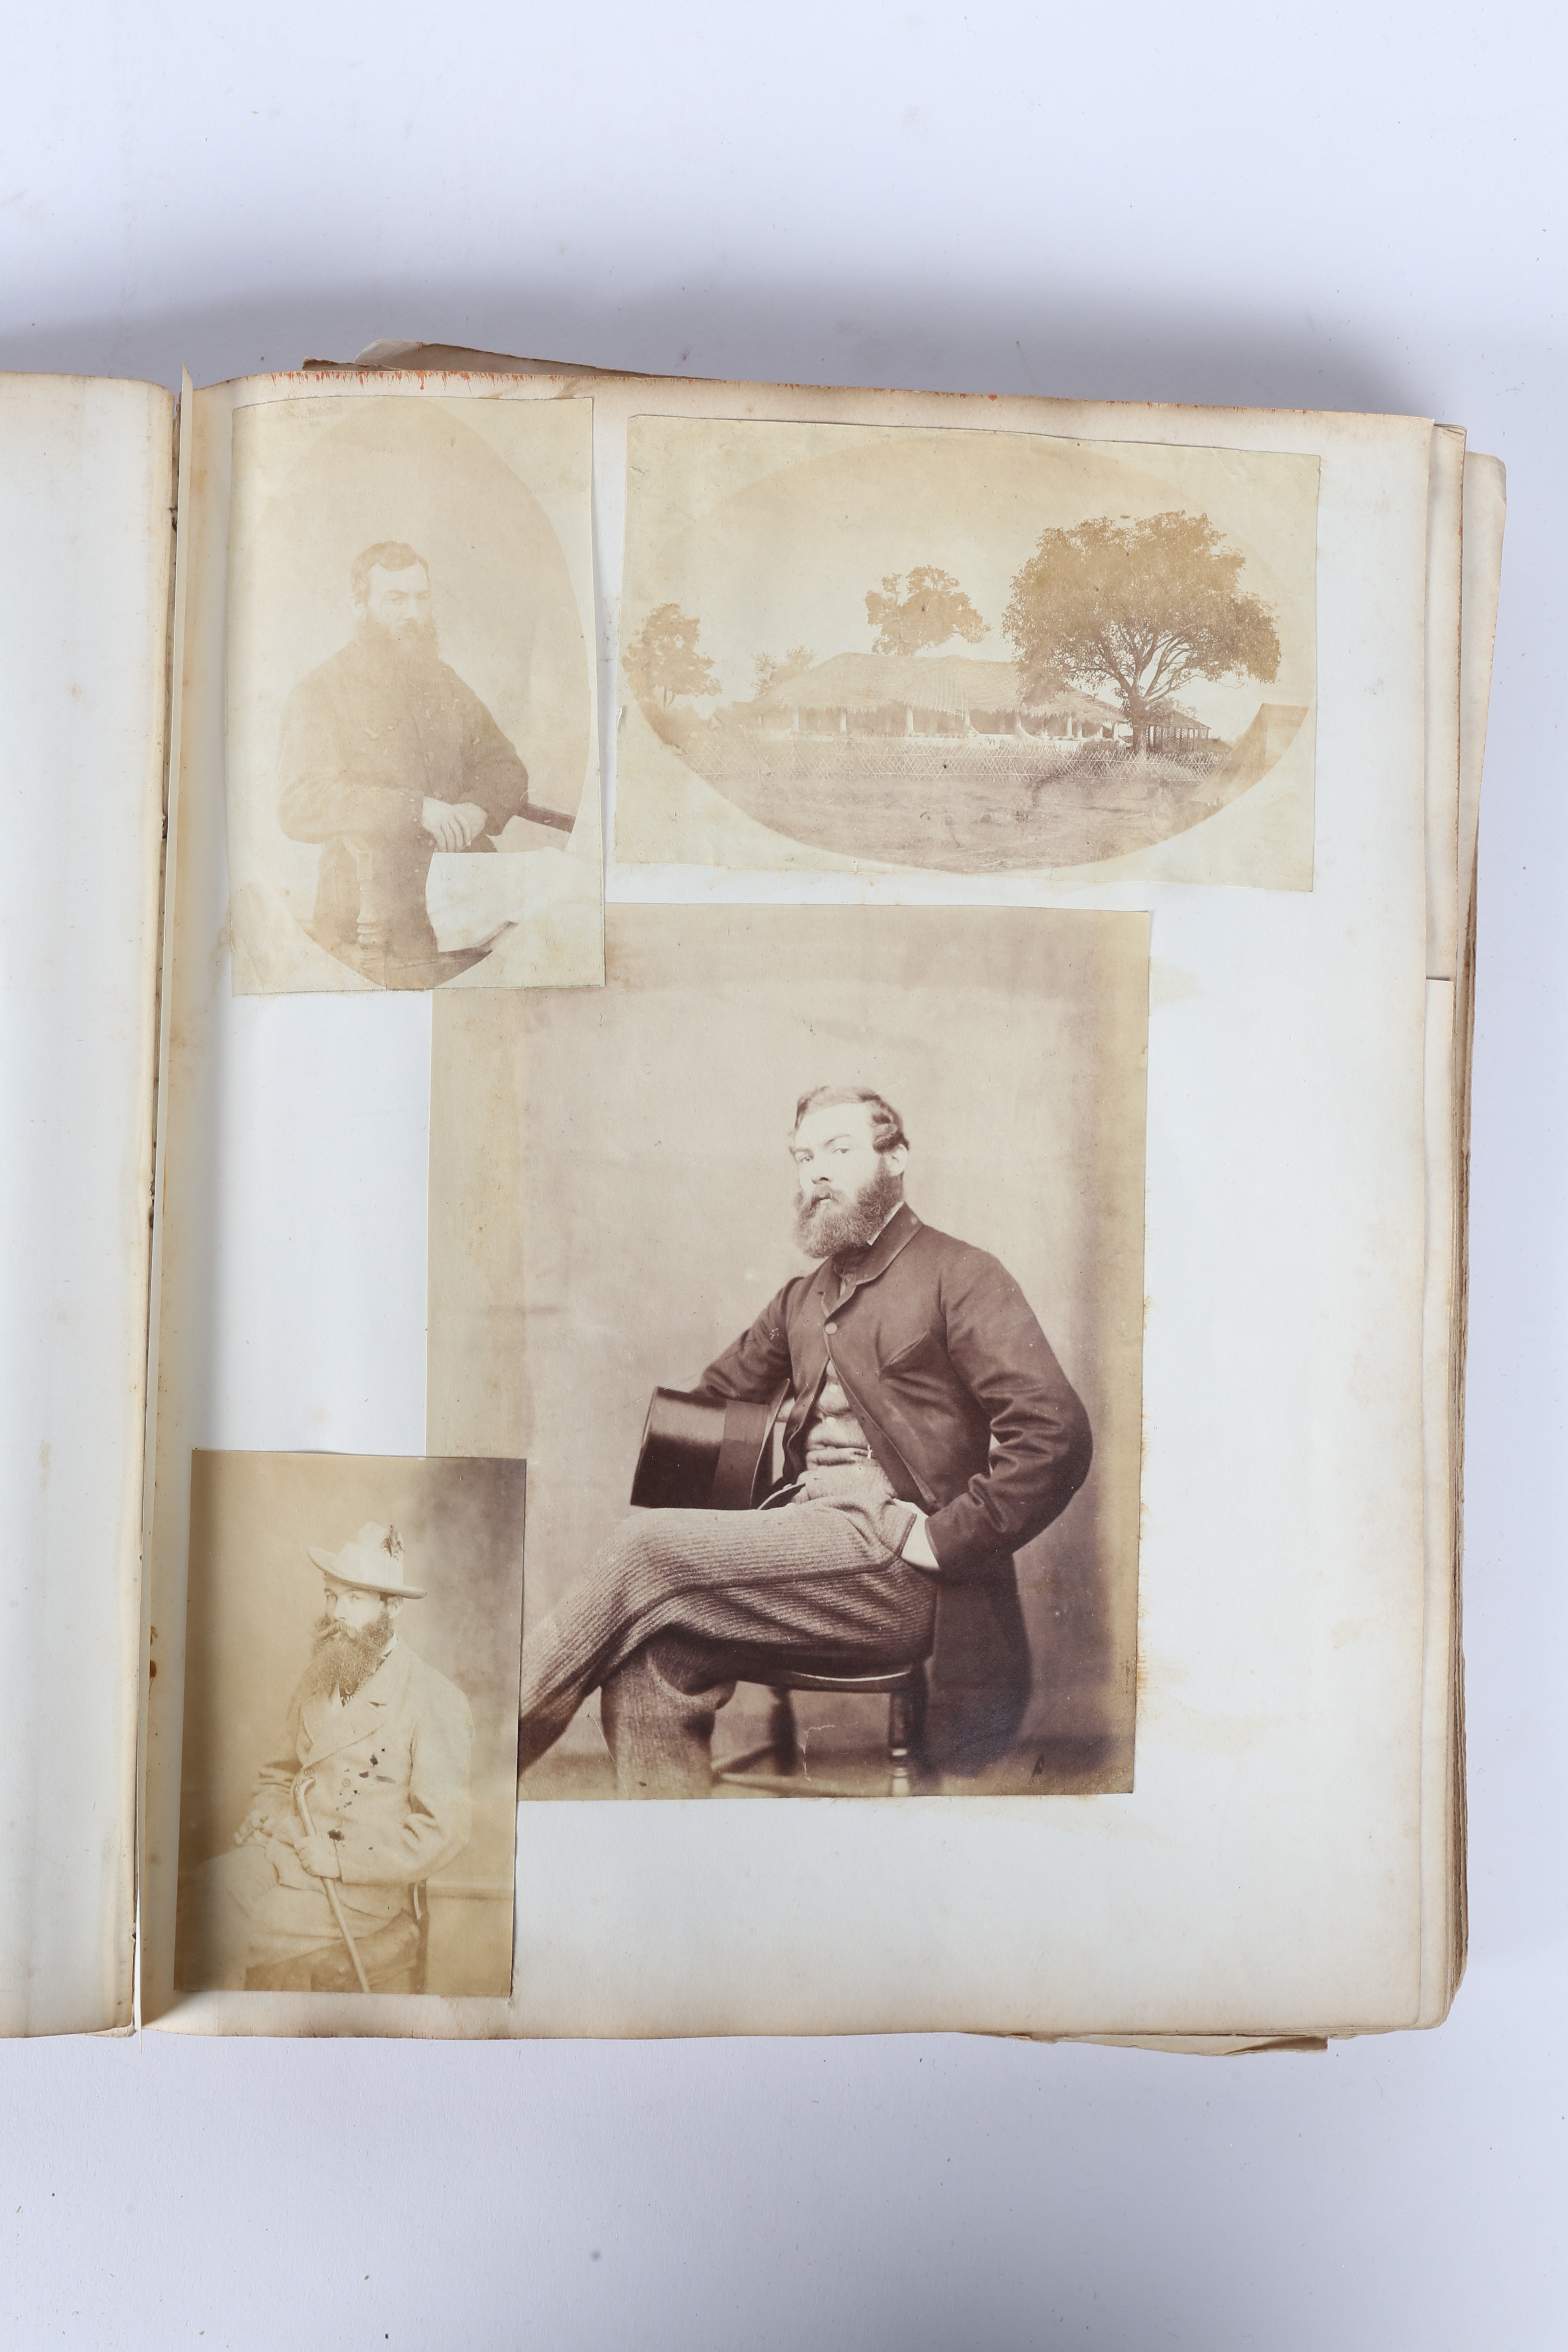 VICTORIAN PHOTOGRAPH ALBUM BELONGING TO GENERAL SIR HARRY JONES GCB DCL, AND HIS WIFE LADY CHARLOTTE - Image 49 of 60